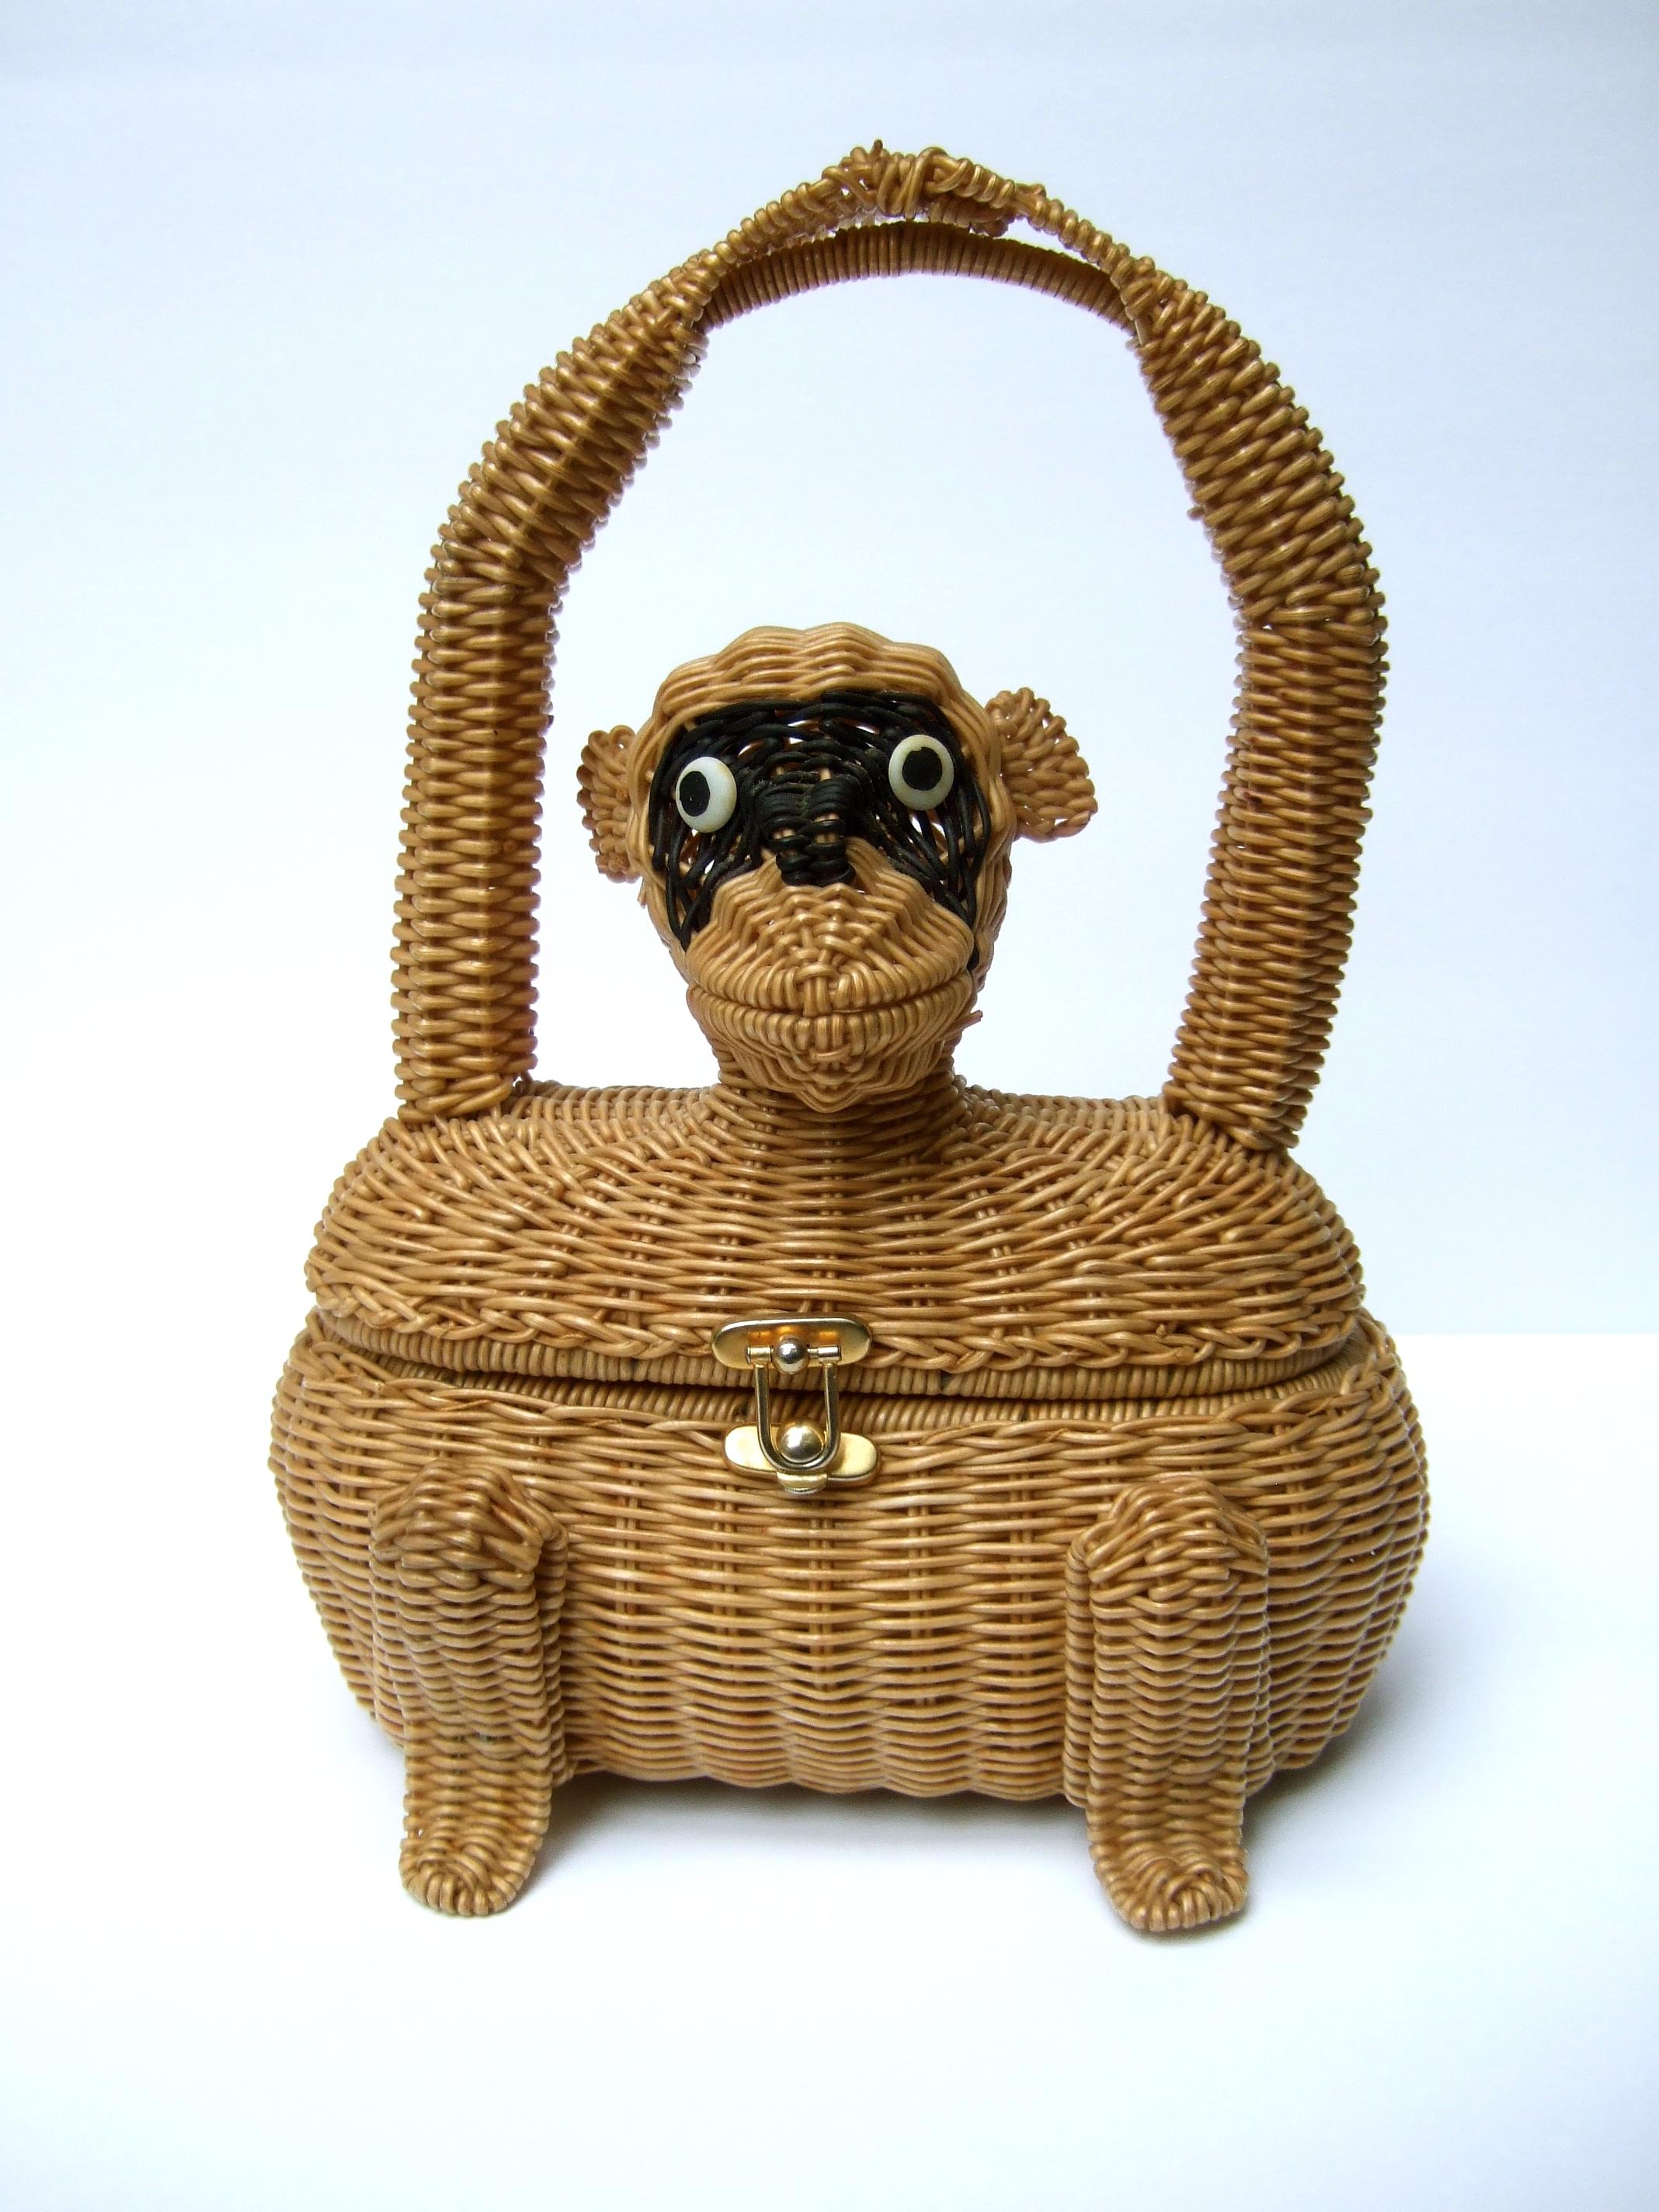 Whimsical Very Rare Wicker Monkey Handbag Designed by Marcus Brothers c 1960 For Sale 8